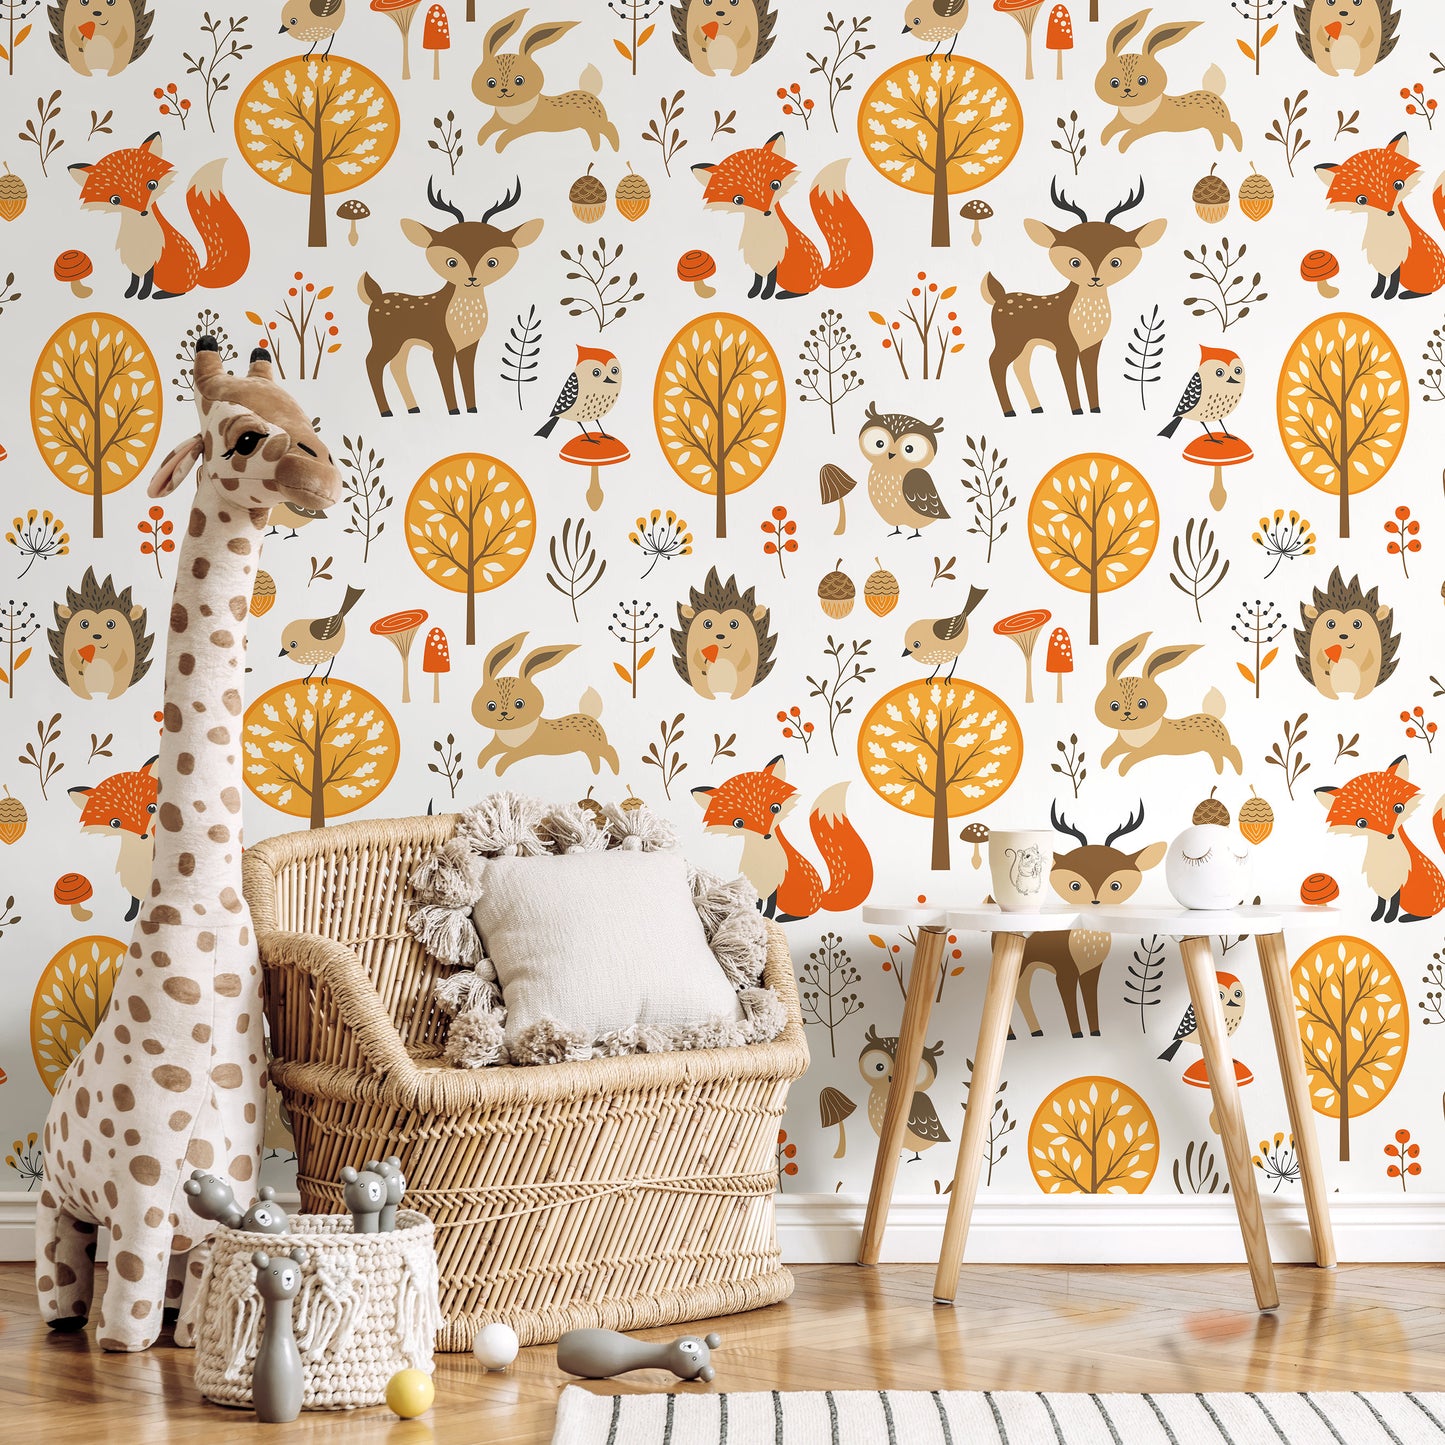 Wallpaper Peel and Stick Wallpaper Removable Wallpaper Home Decor Wall Art Wall Decor Room Decor / Cute Animal Kids Wallpaper - A082